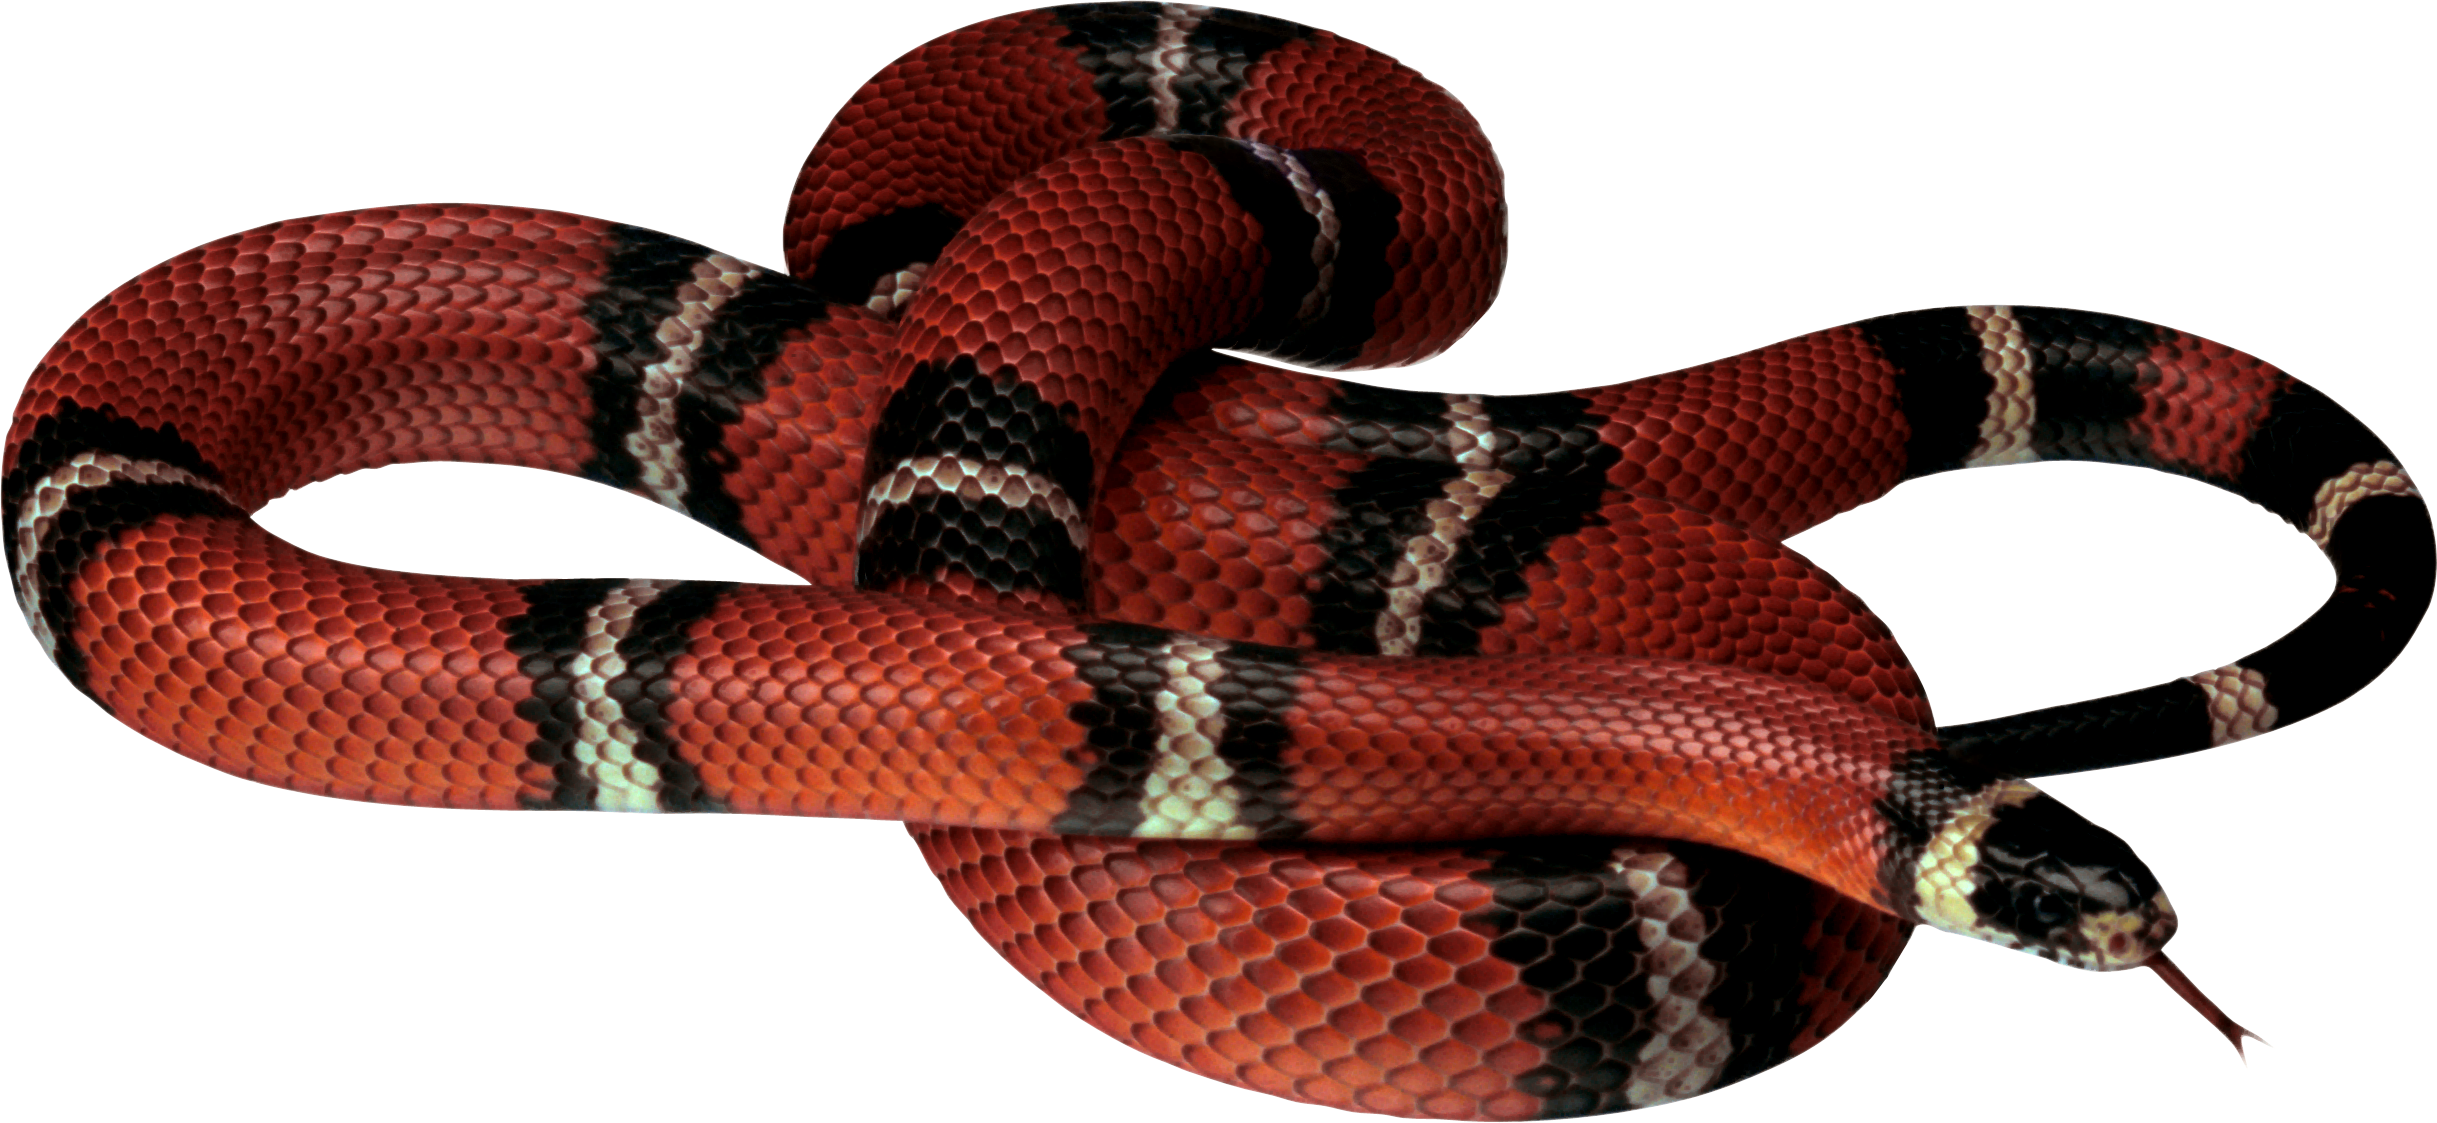 Snake Png Image Picture Download Free - HD Wallpaper 